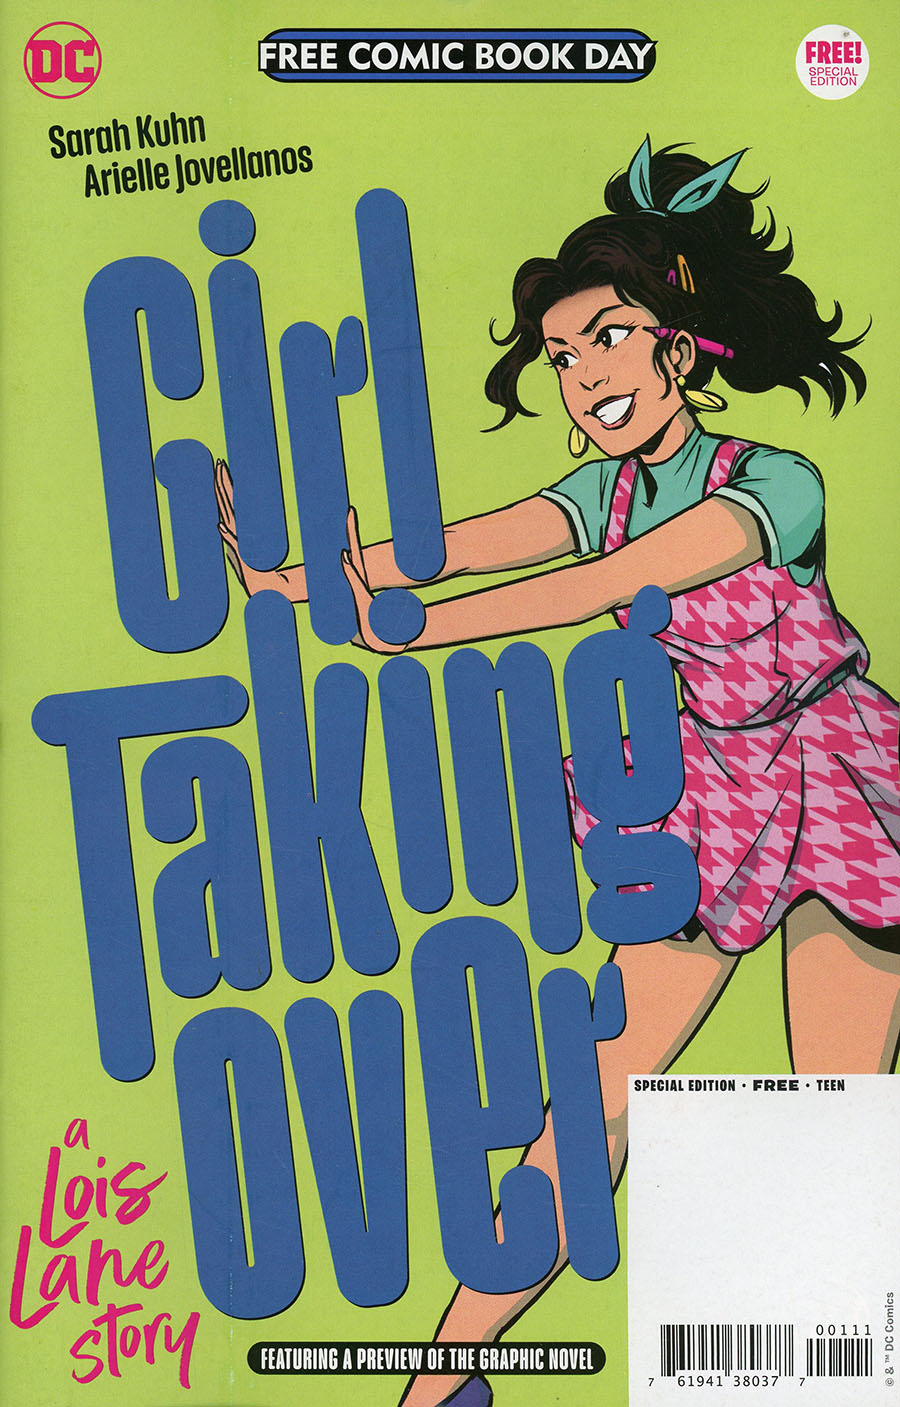 FCBD 2023 Girl Taking Over A Lois Lane Story Special Edition - FREE - Limit 1 Per Customer